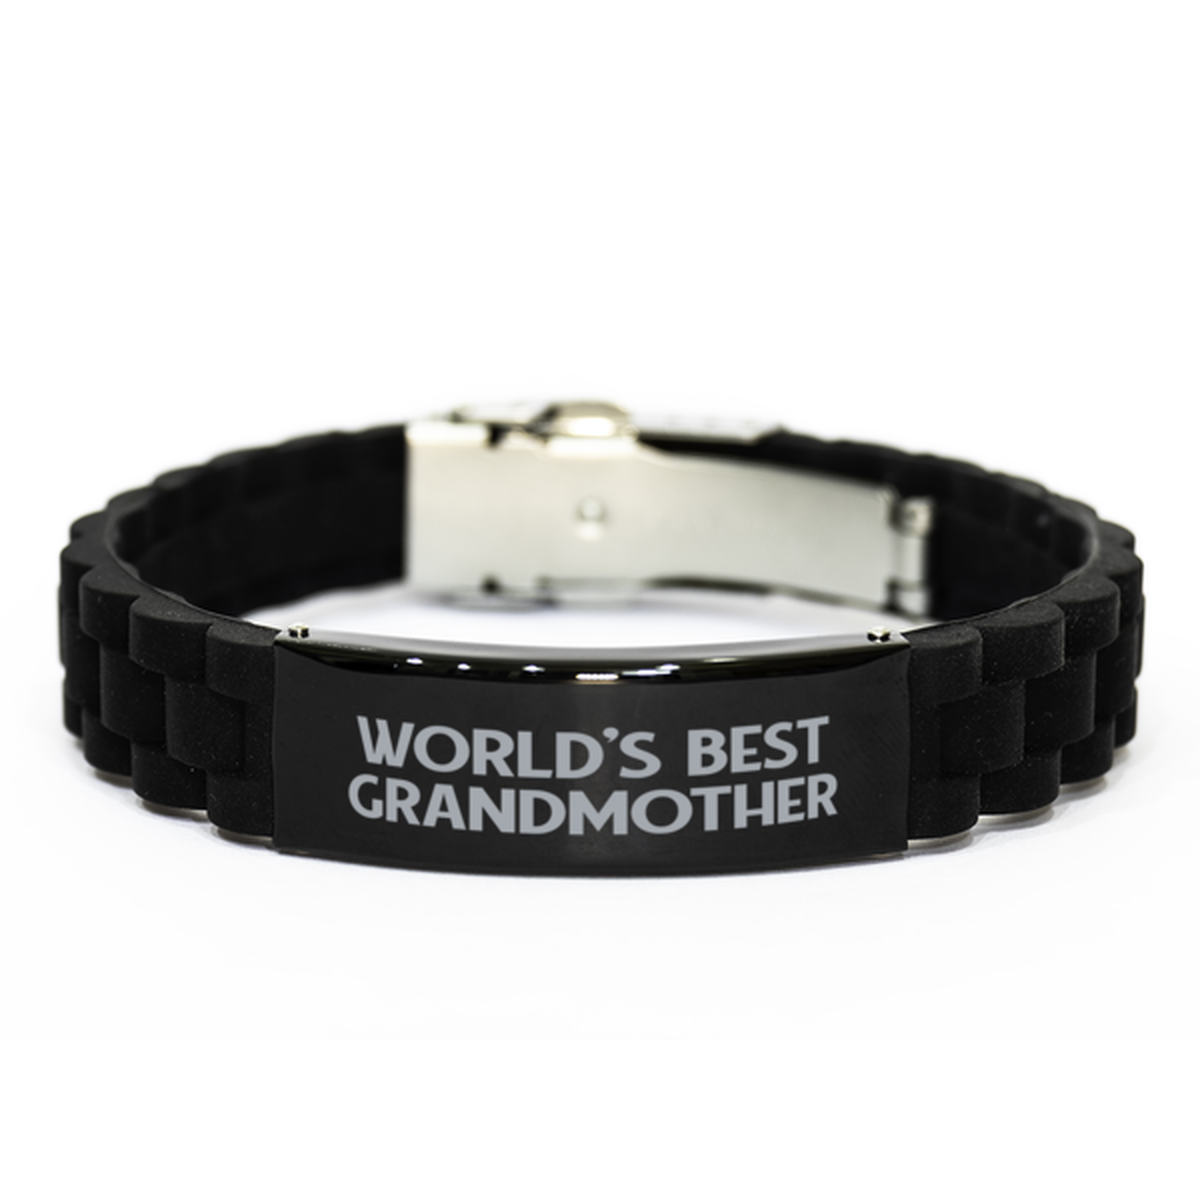 World's Best Grandmother Gifts, Funny Black Engraved Bracelet For Grandmother, Family Gifts For Women